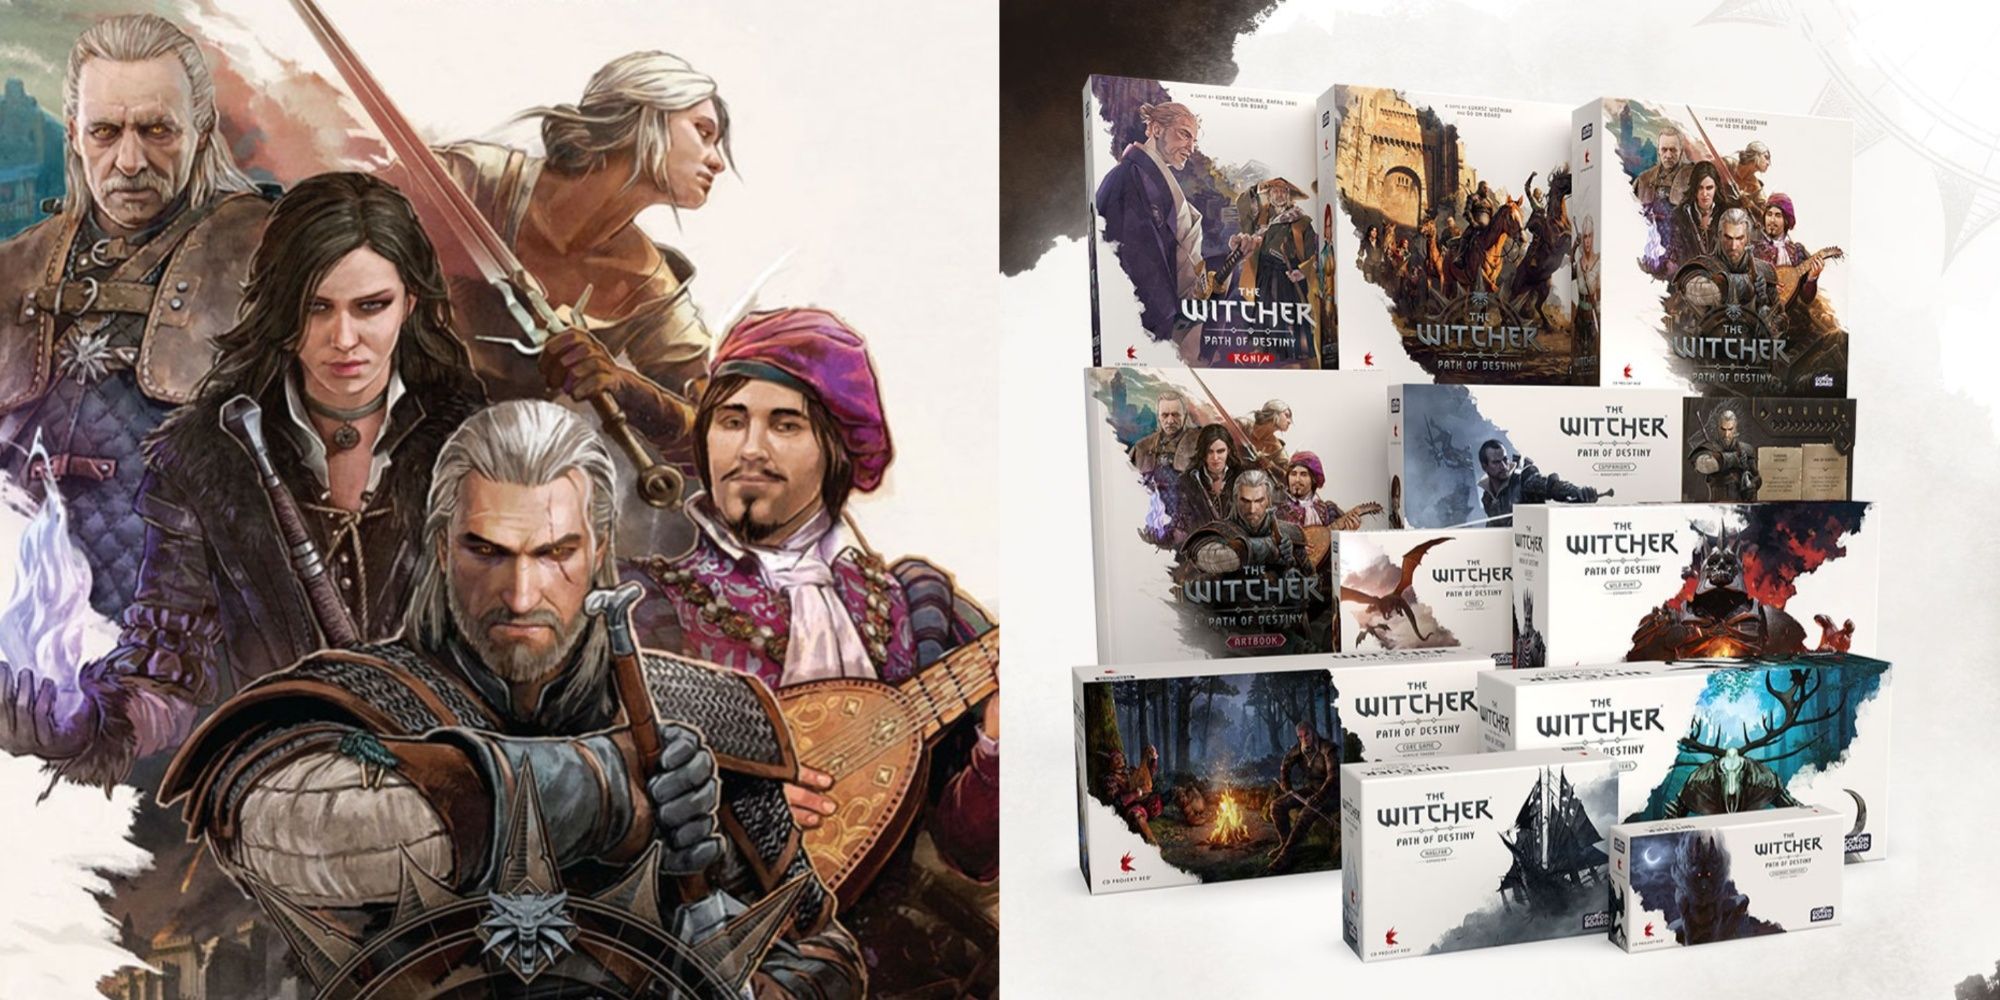 the witcher path of destiny box art and all of its expansions